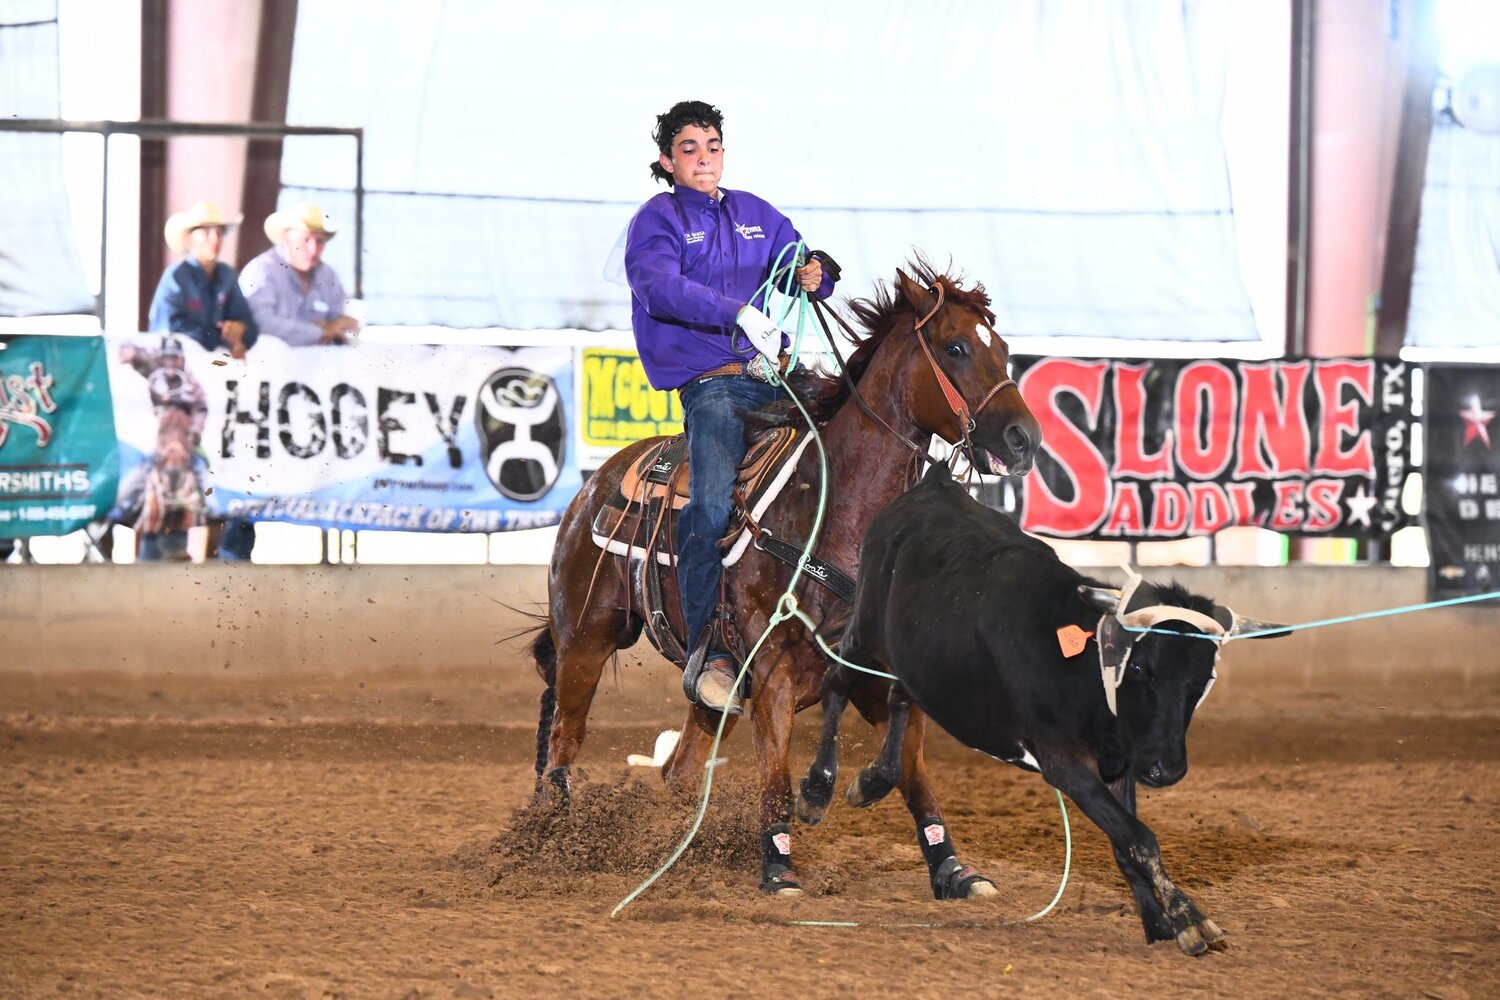 Buck Garza competes in the team roping competition for the Texas High School Rodeo Association.